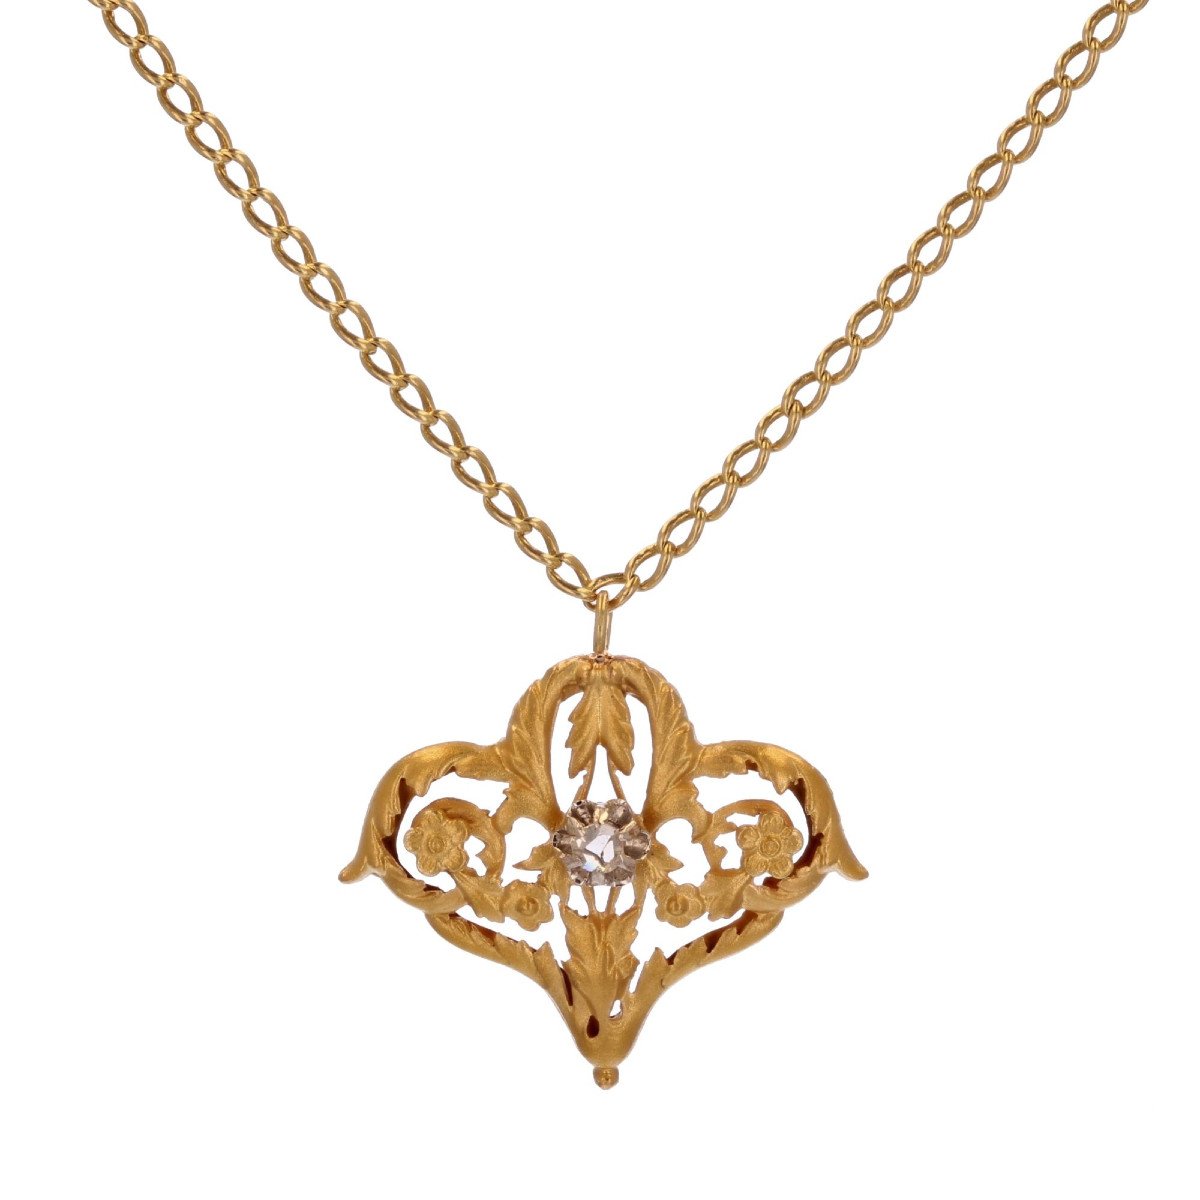 Old Chain And Its Arabesque And Rose-cut Diamond Pendant